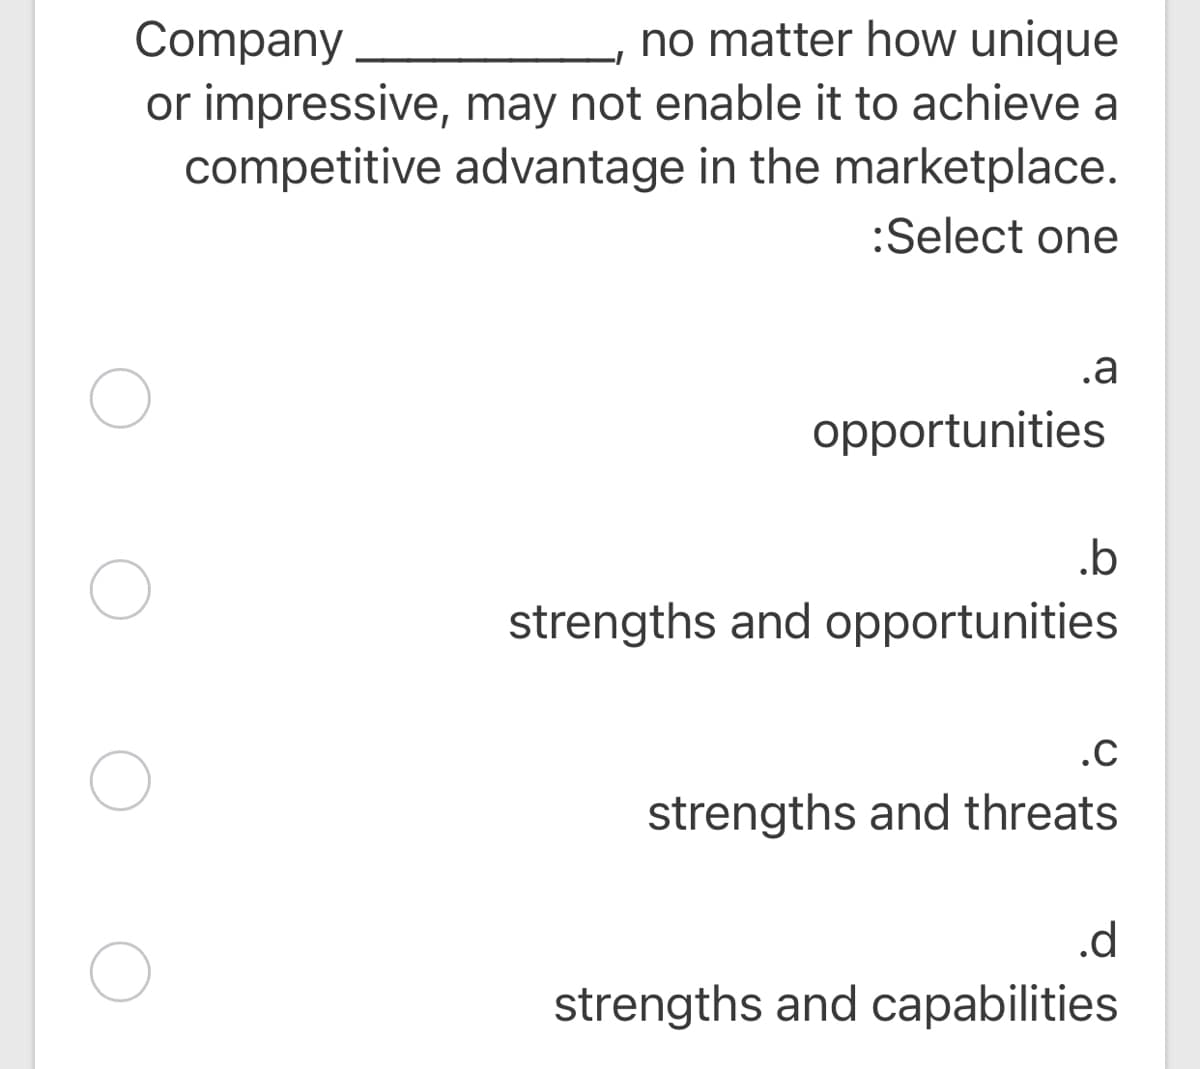 Company
or impressive, may not enable it to achieve a
competitive advantage in the marketplace.
no matter how unique
:Select one
.a
opportunities
.b
strengths and opportunities
.C
strengths and threats
.d
strengths and capabilities
